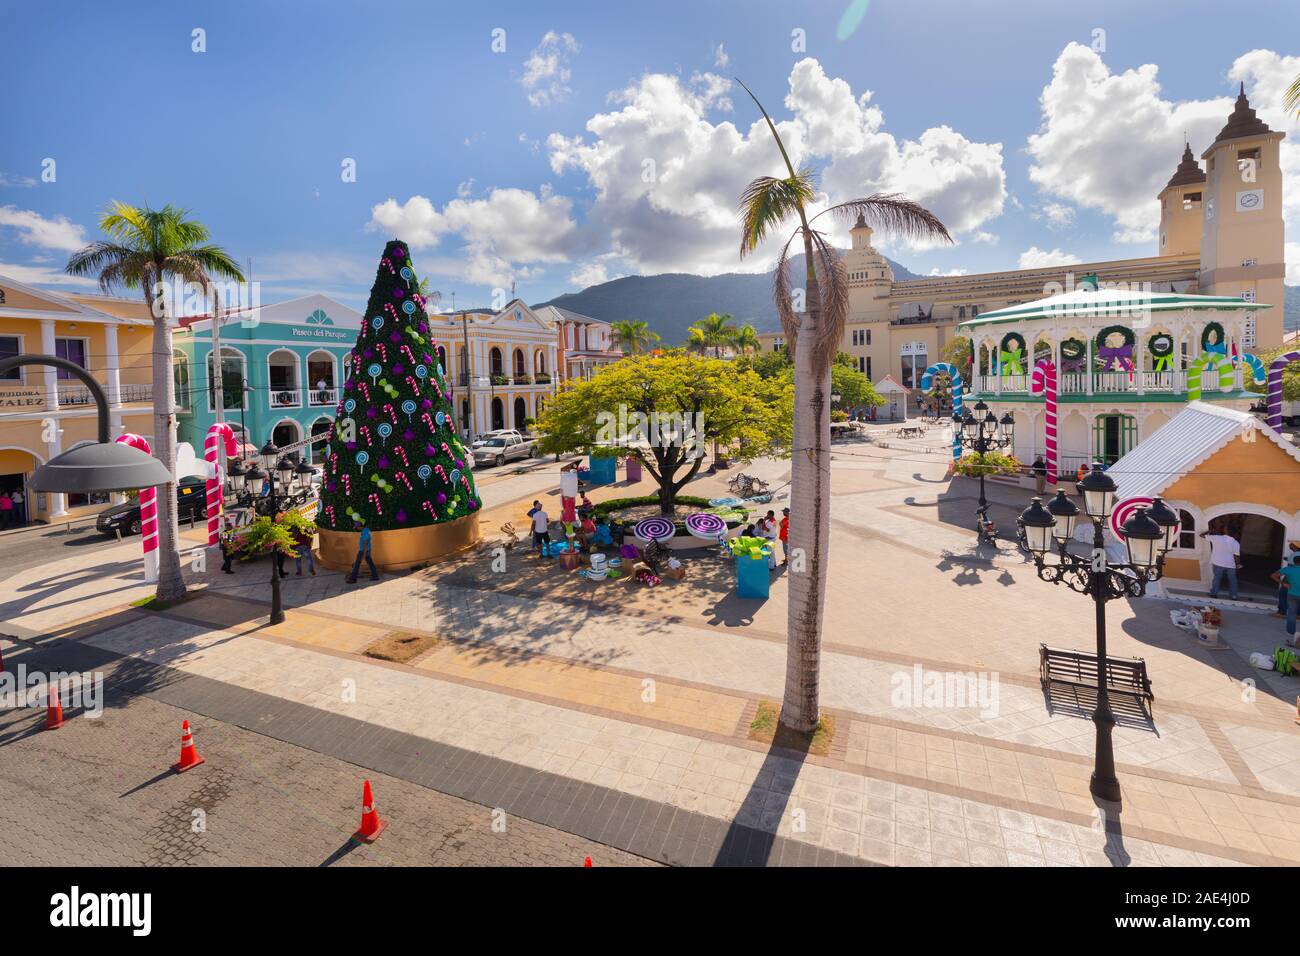 Workers putting up Christmas decorations in the Latin American town square of Puerto Plata, Dominican Republic on the island of Hispaniola. Stock Photo